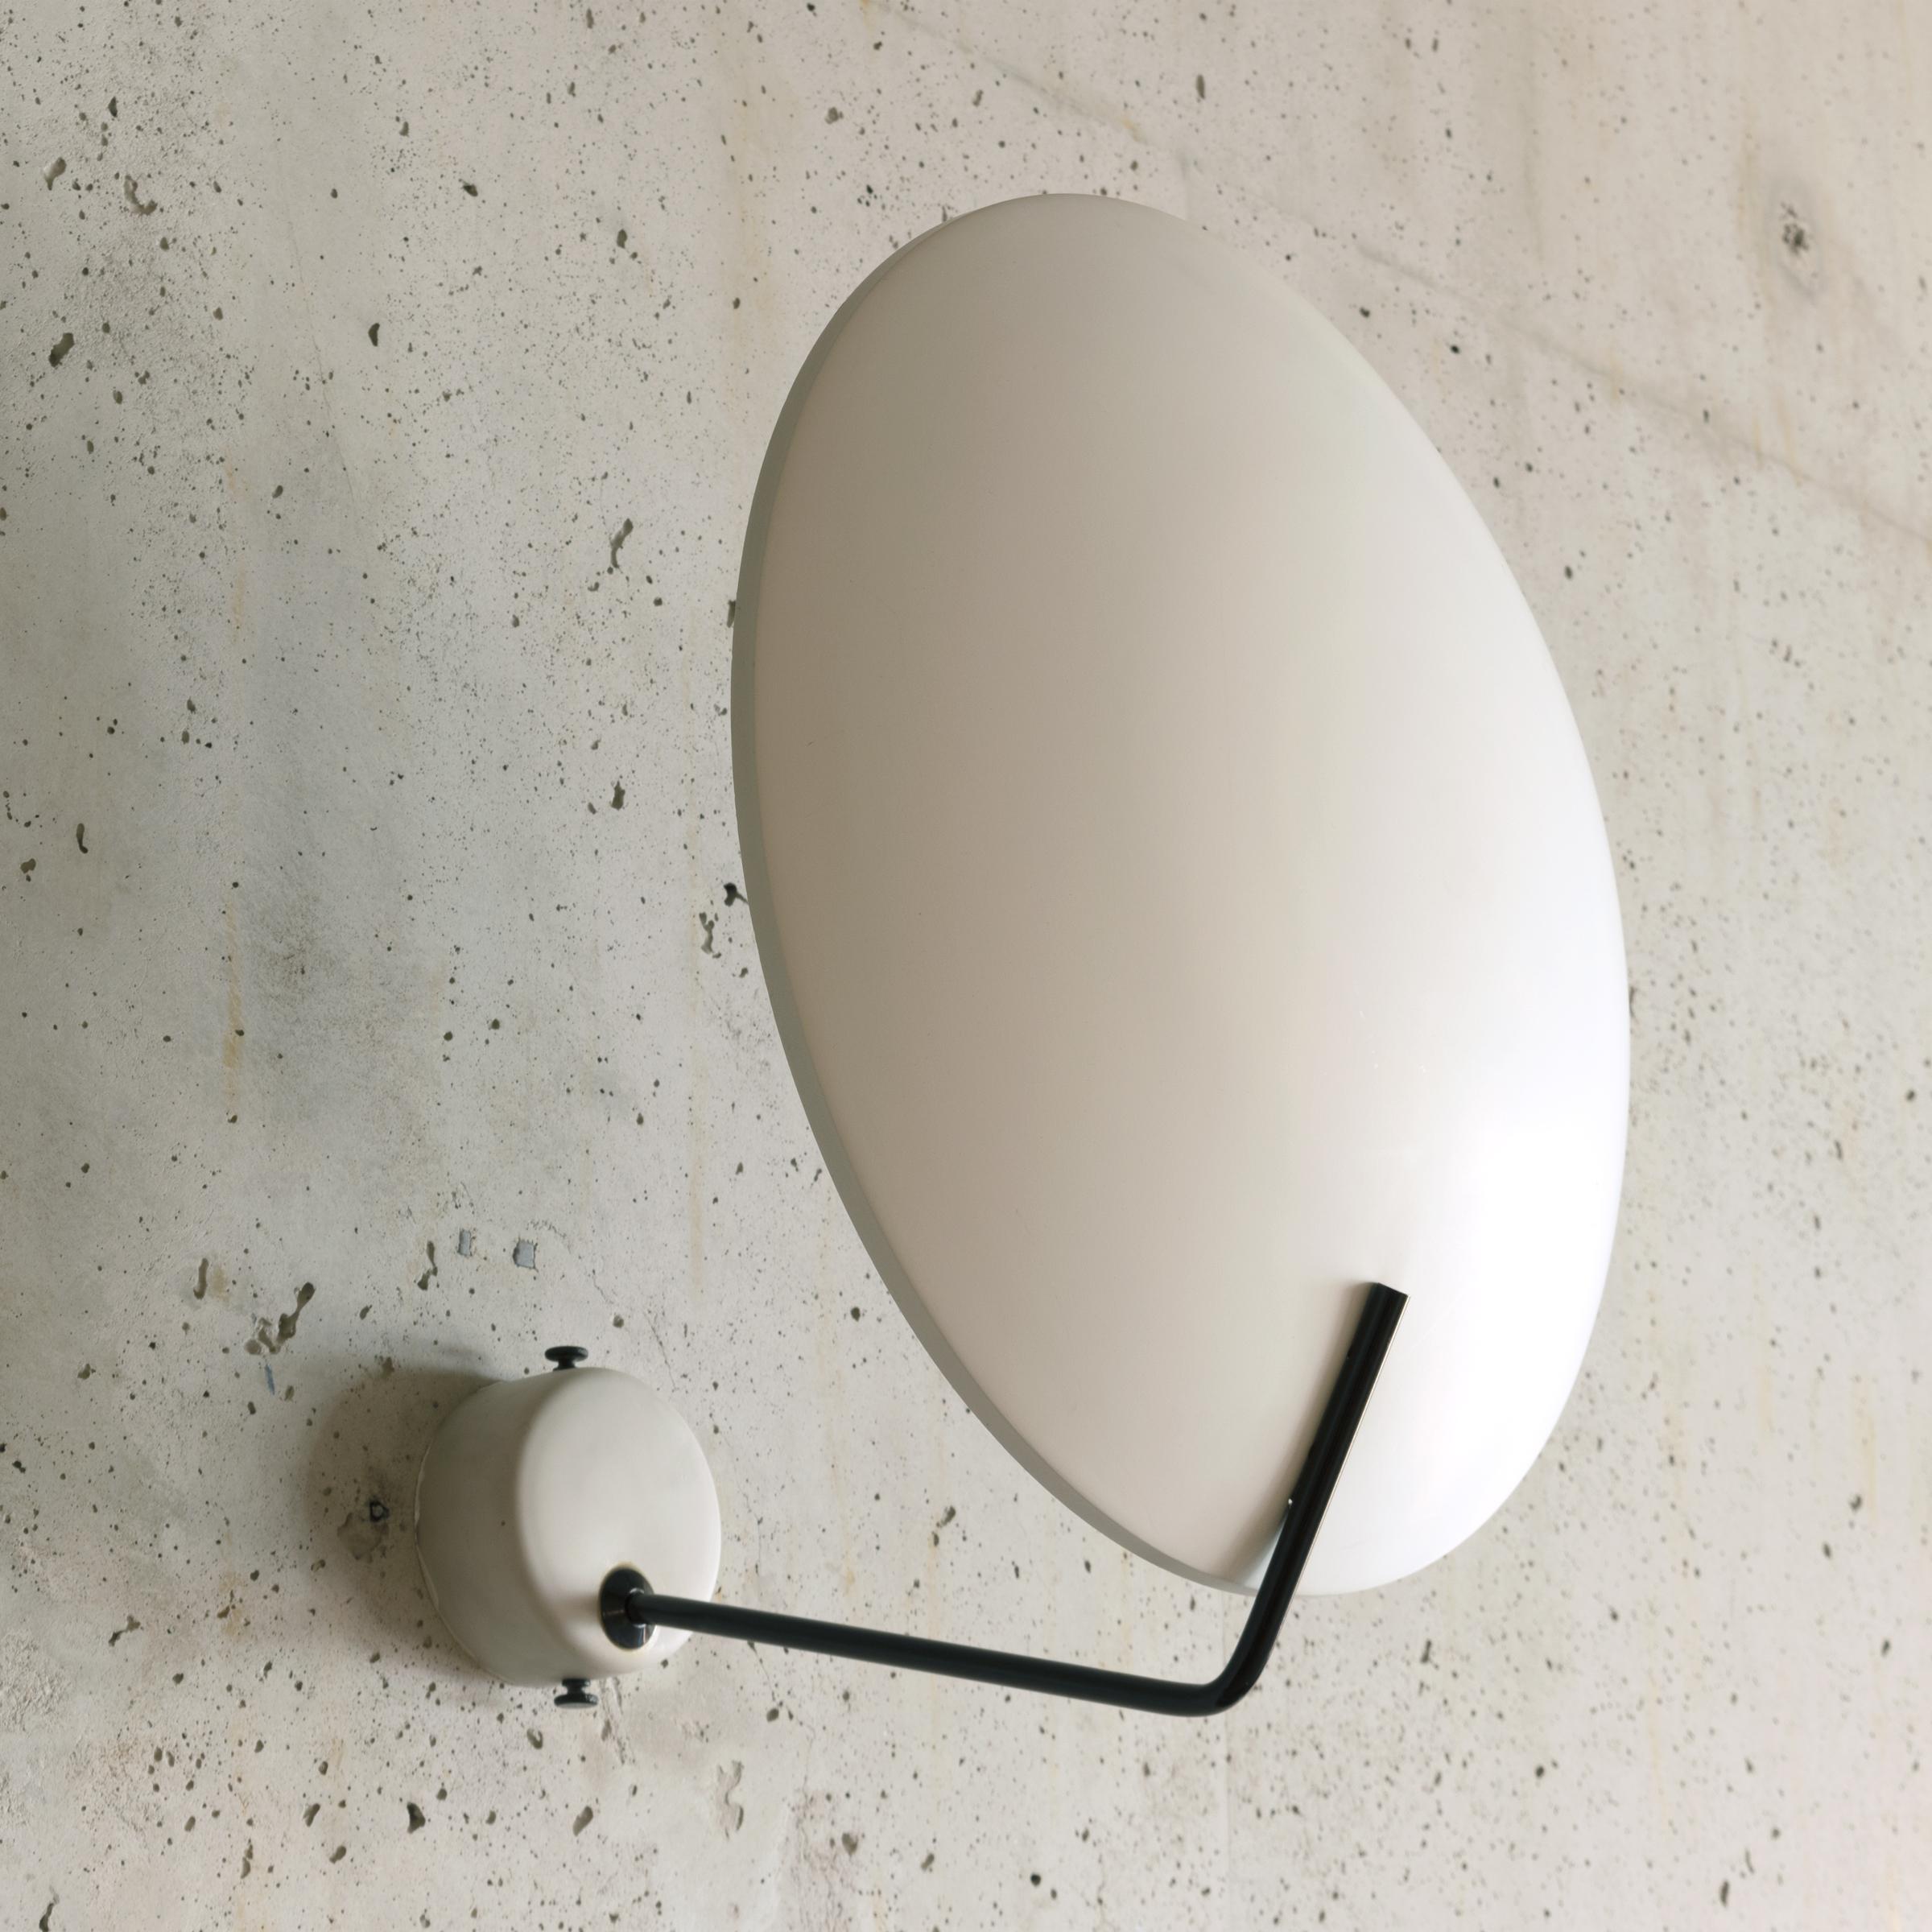 Bruno Gatta wall or ceiling lamp Model 232 designed in 1962 for Stilnovo Italy. White metal shade hold by thin black wire and white circular bracket all in very good original condition. Bought from the first owners with a residence full of